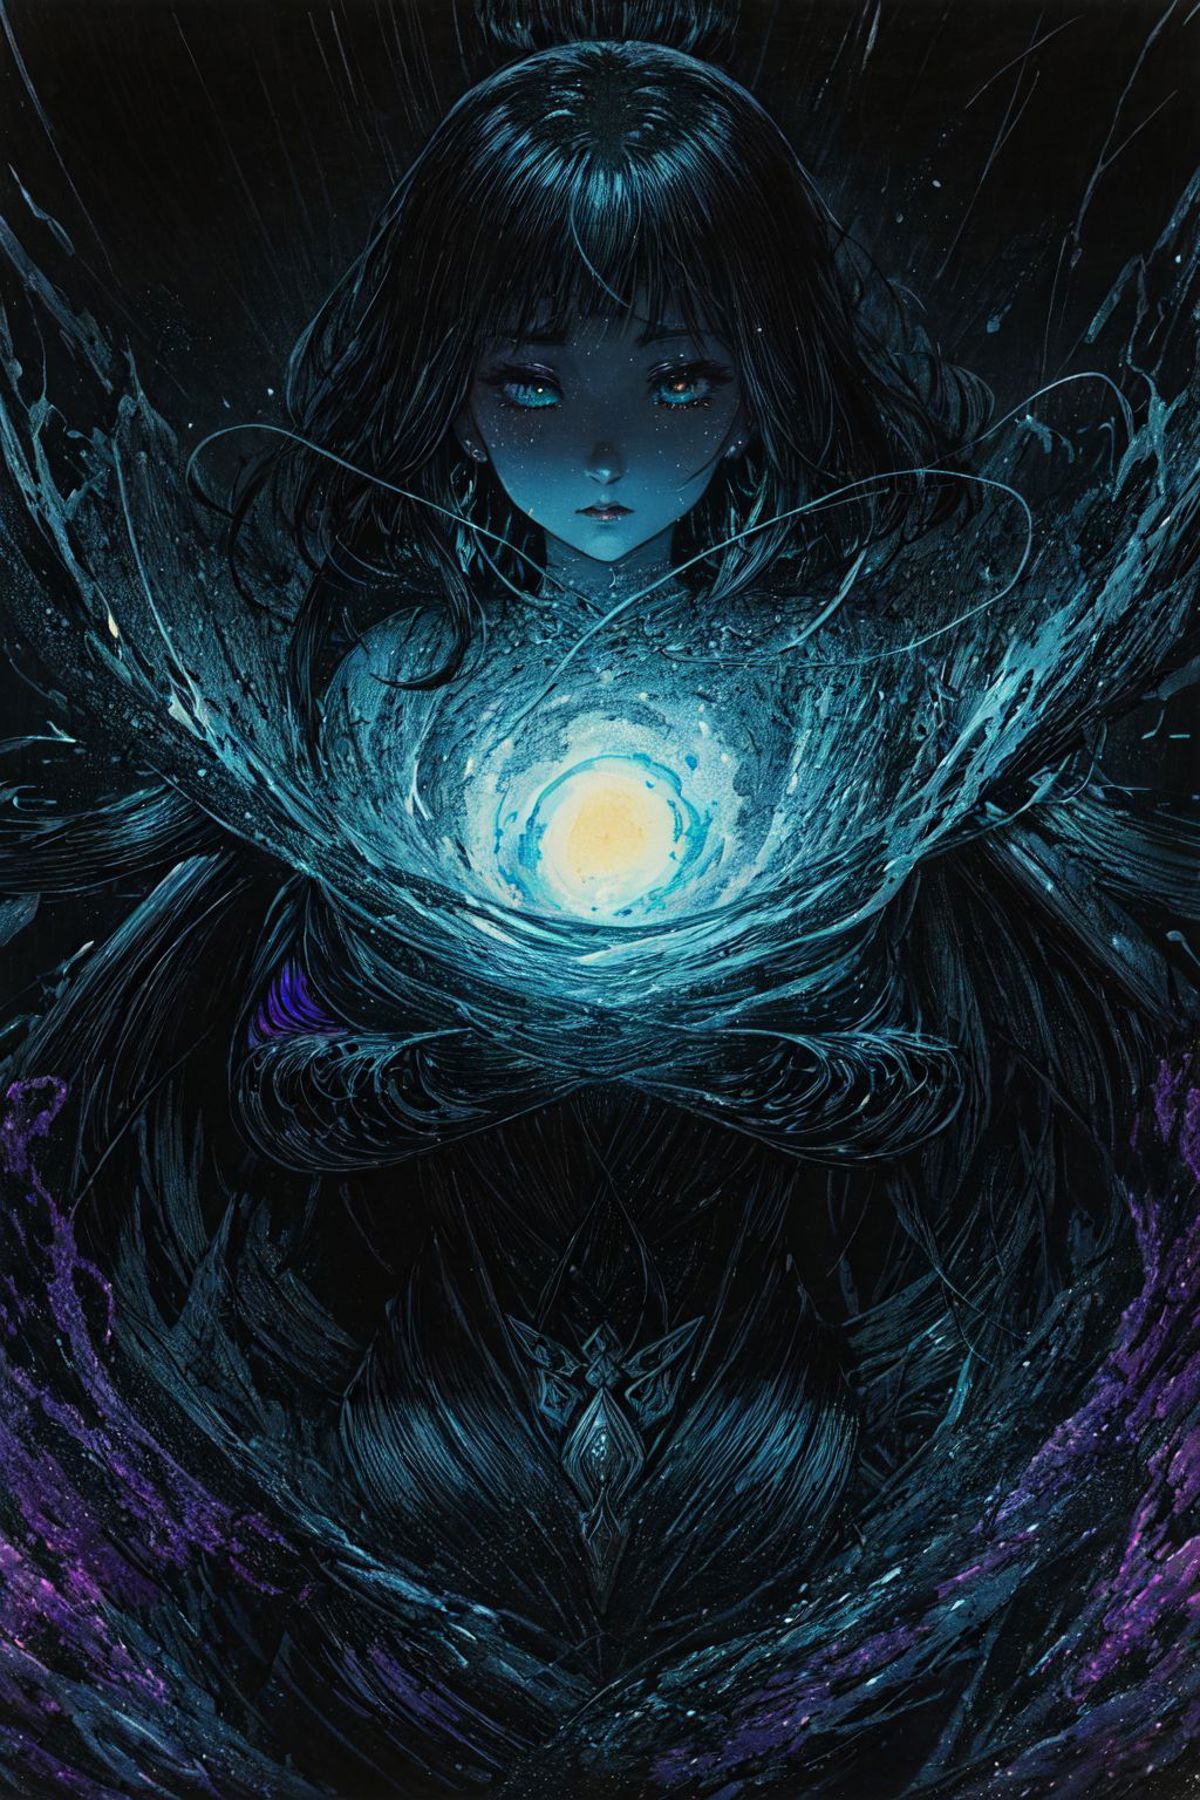 Artistic Illustration of a Girl with a Blue Aura Holding a Glowing Orb